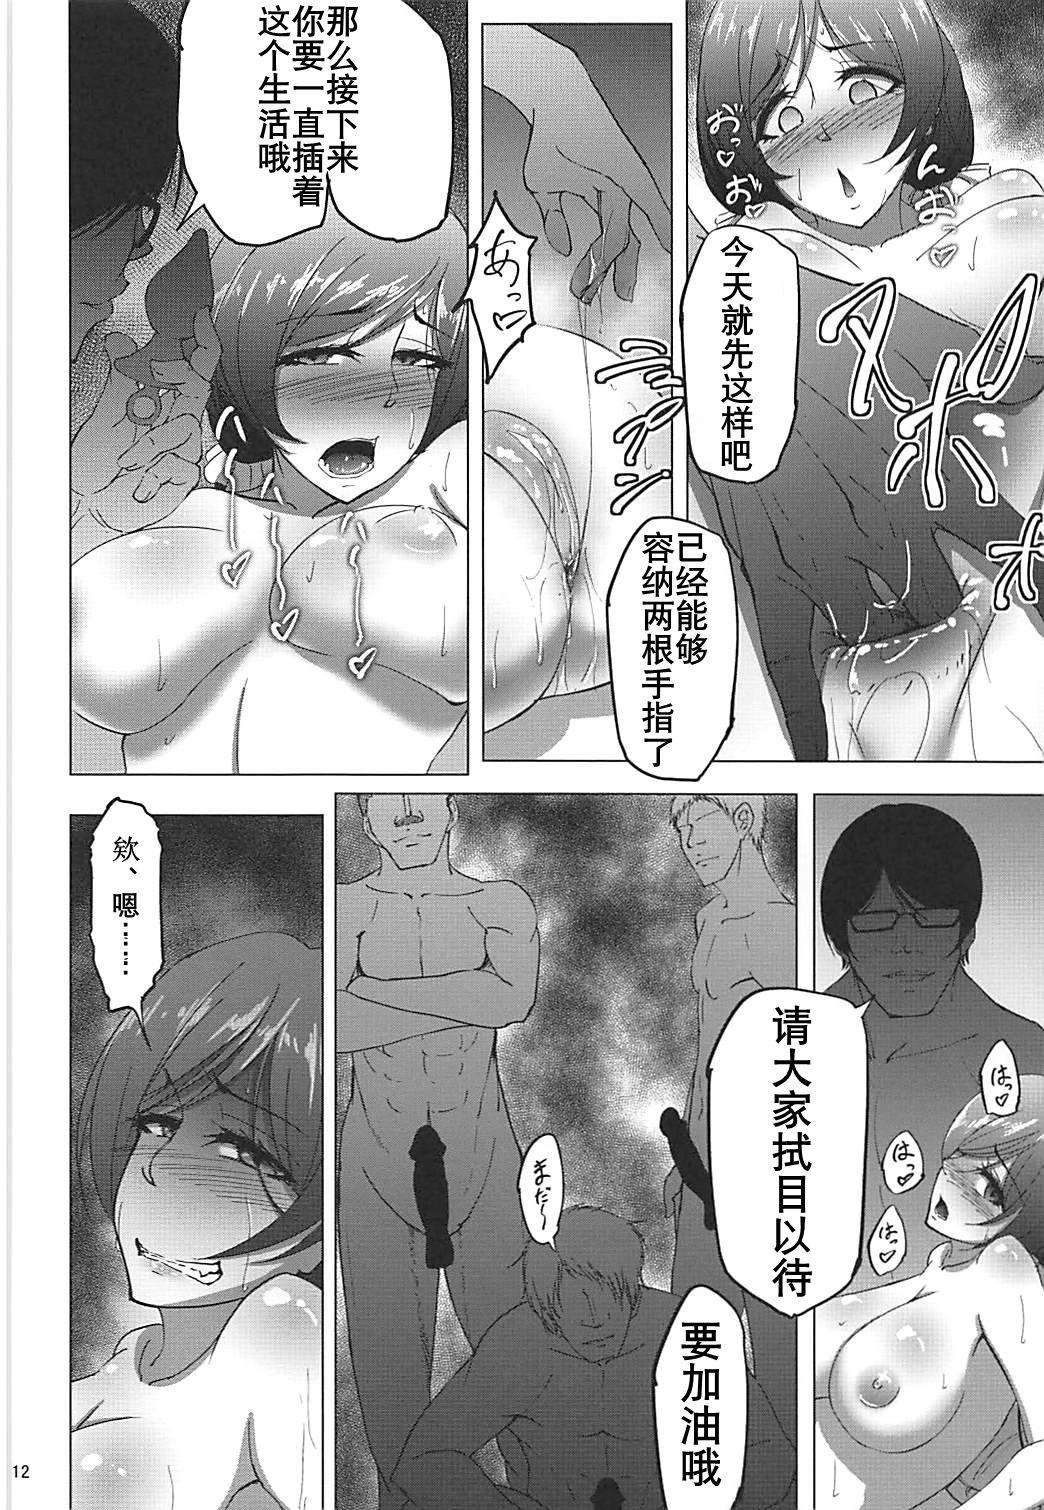 Stripping Nontan Before After Seaside | 东条希的滨海旅行 - Love live Free Teenage Porn - Page 11